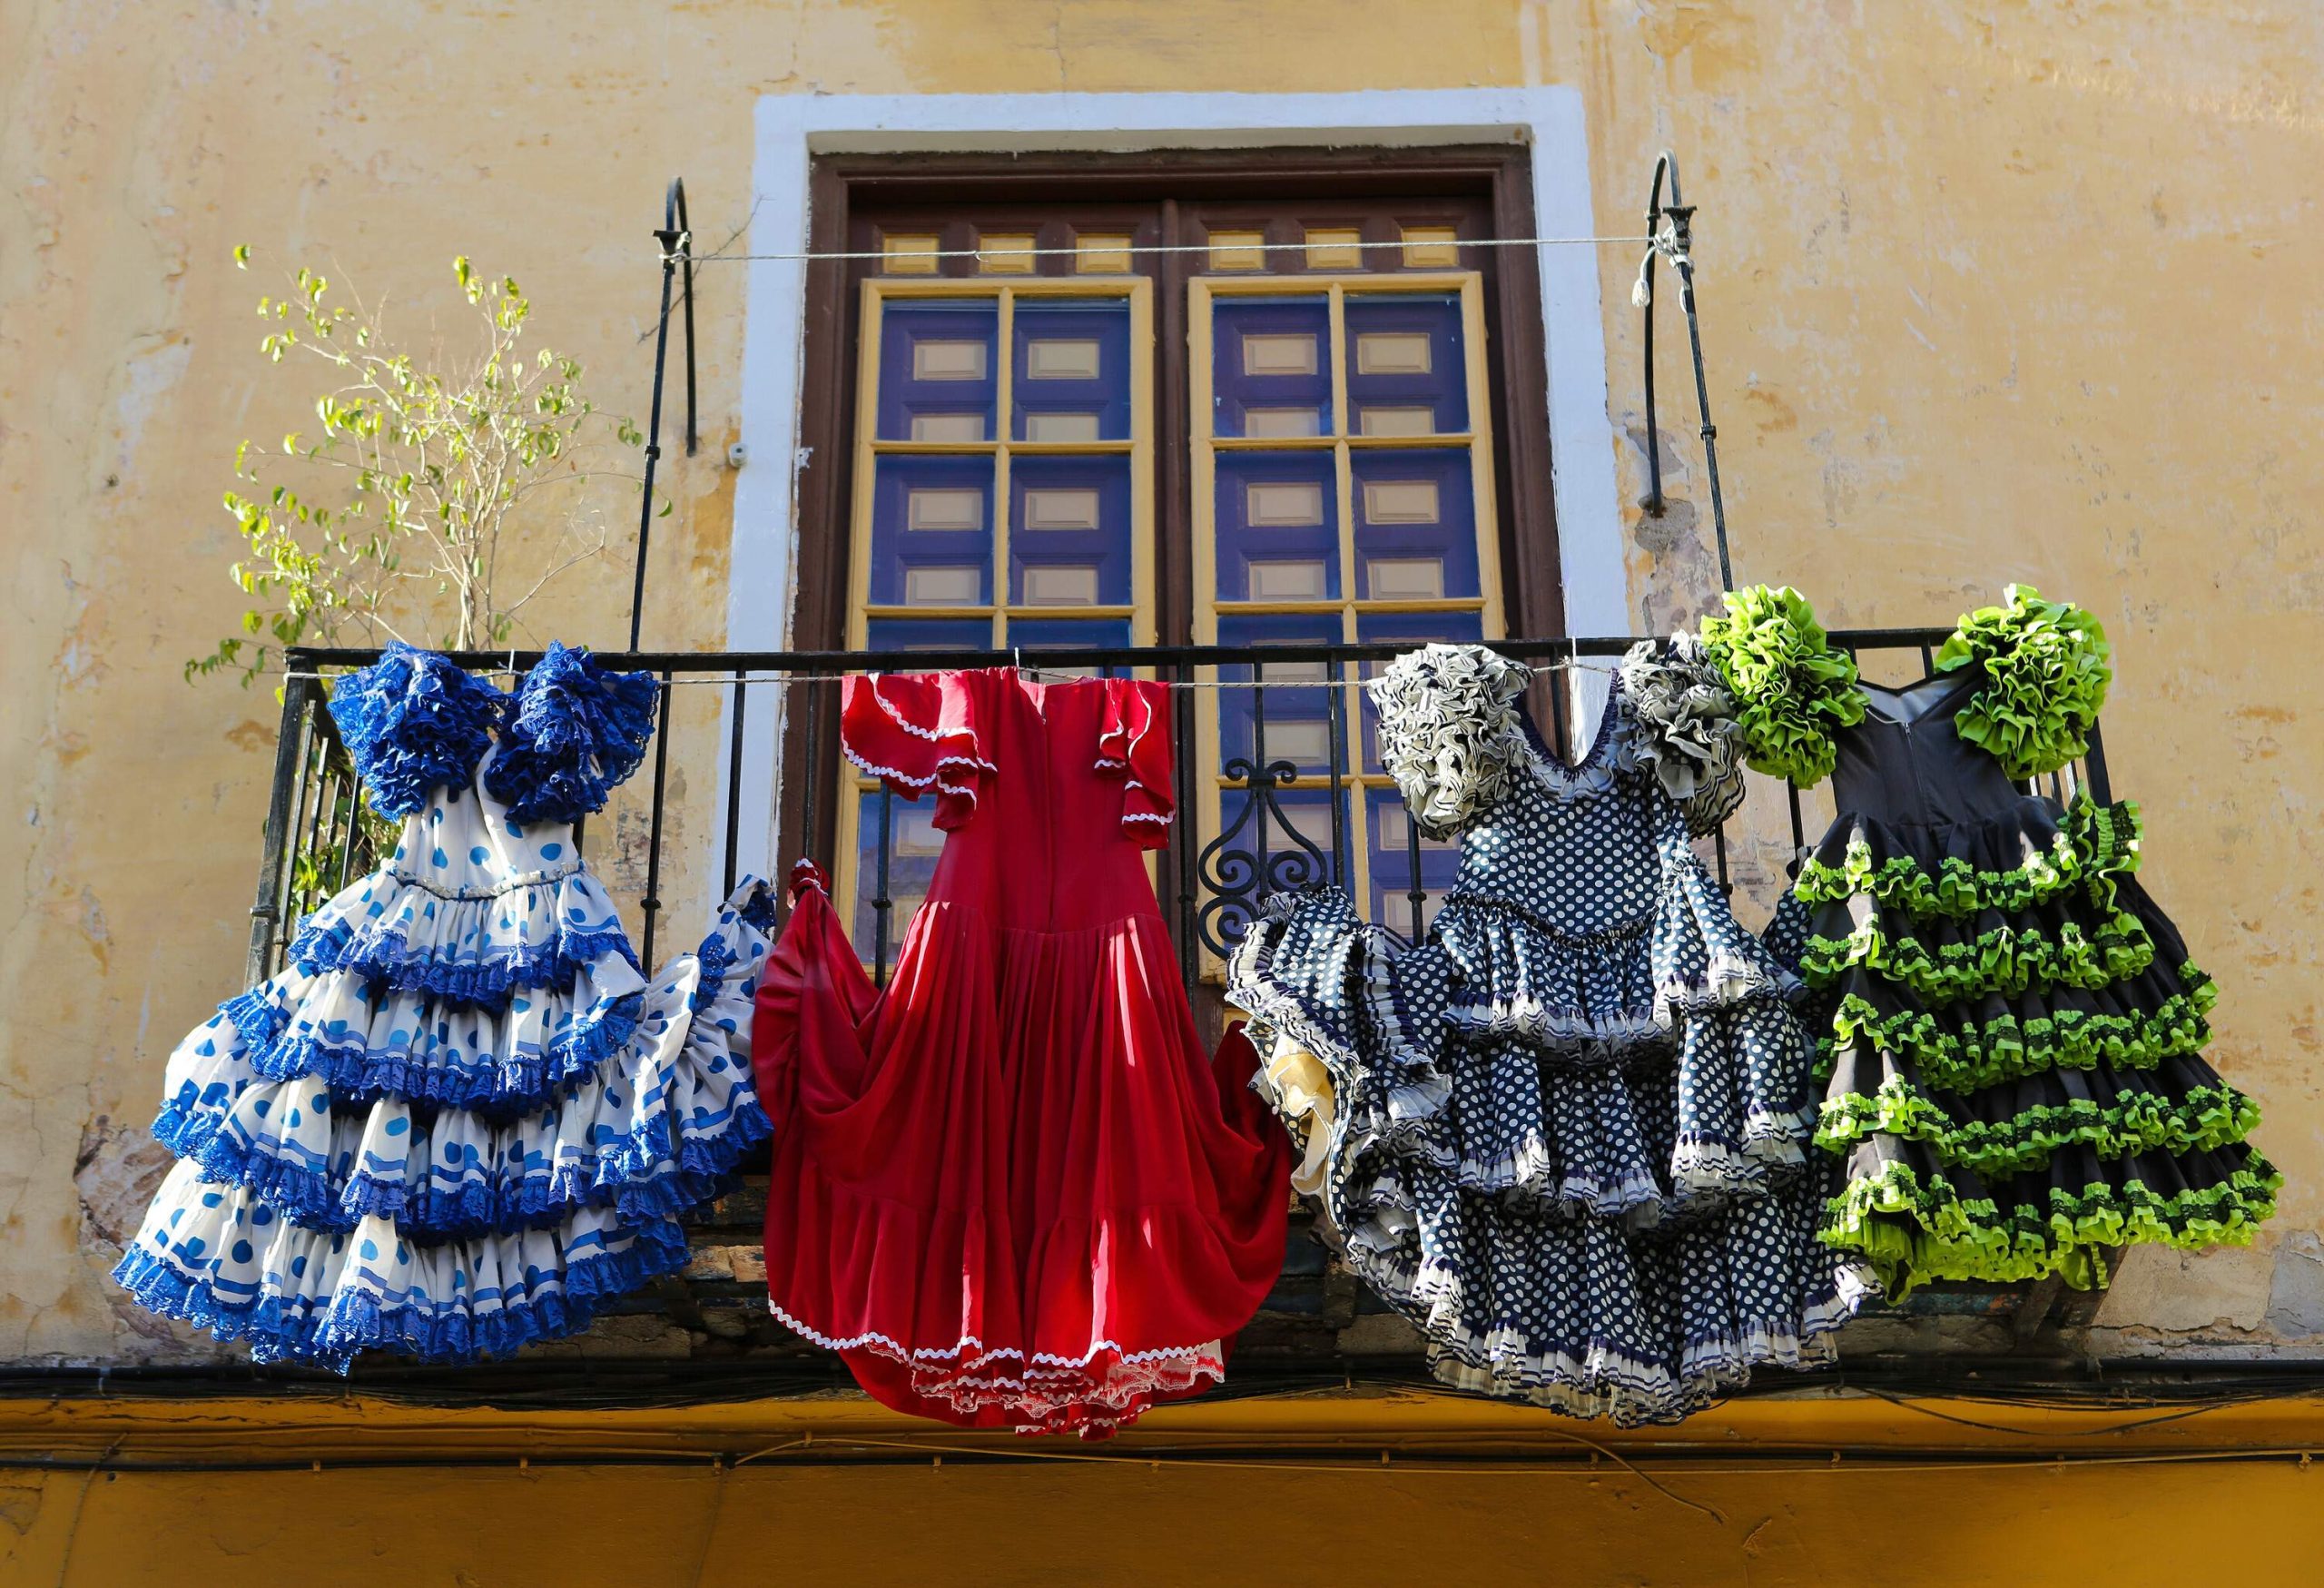 Four unique and colourful flamenco outfits hanging from a balcony railing.